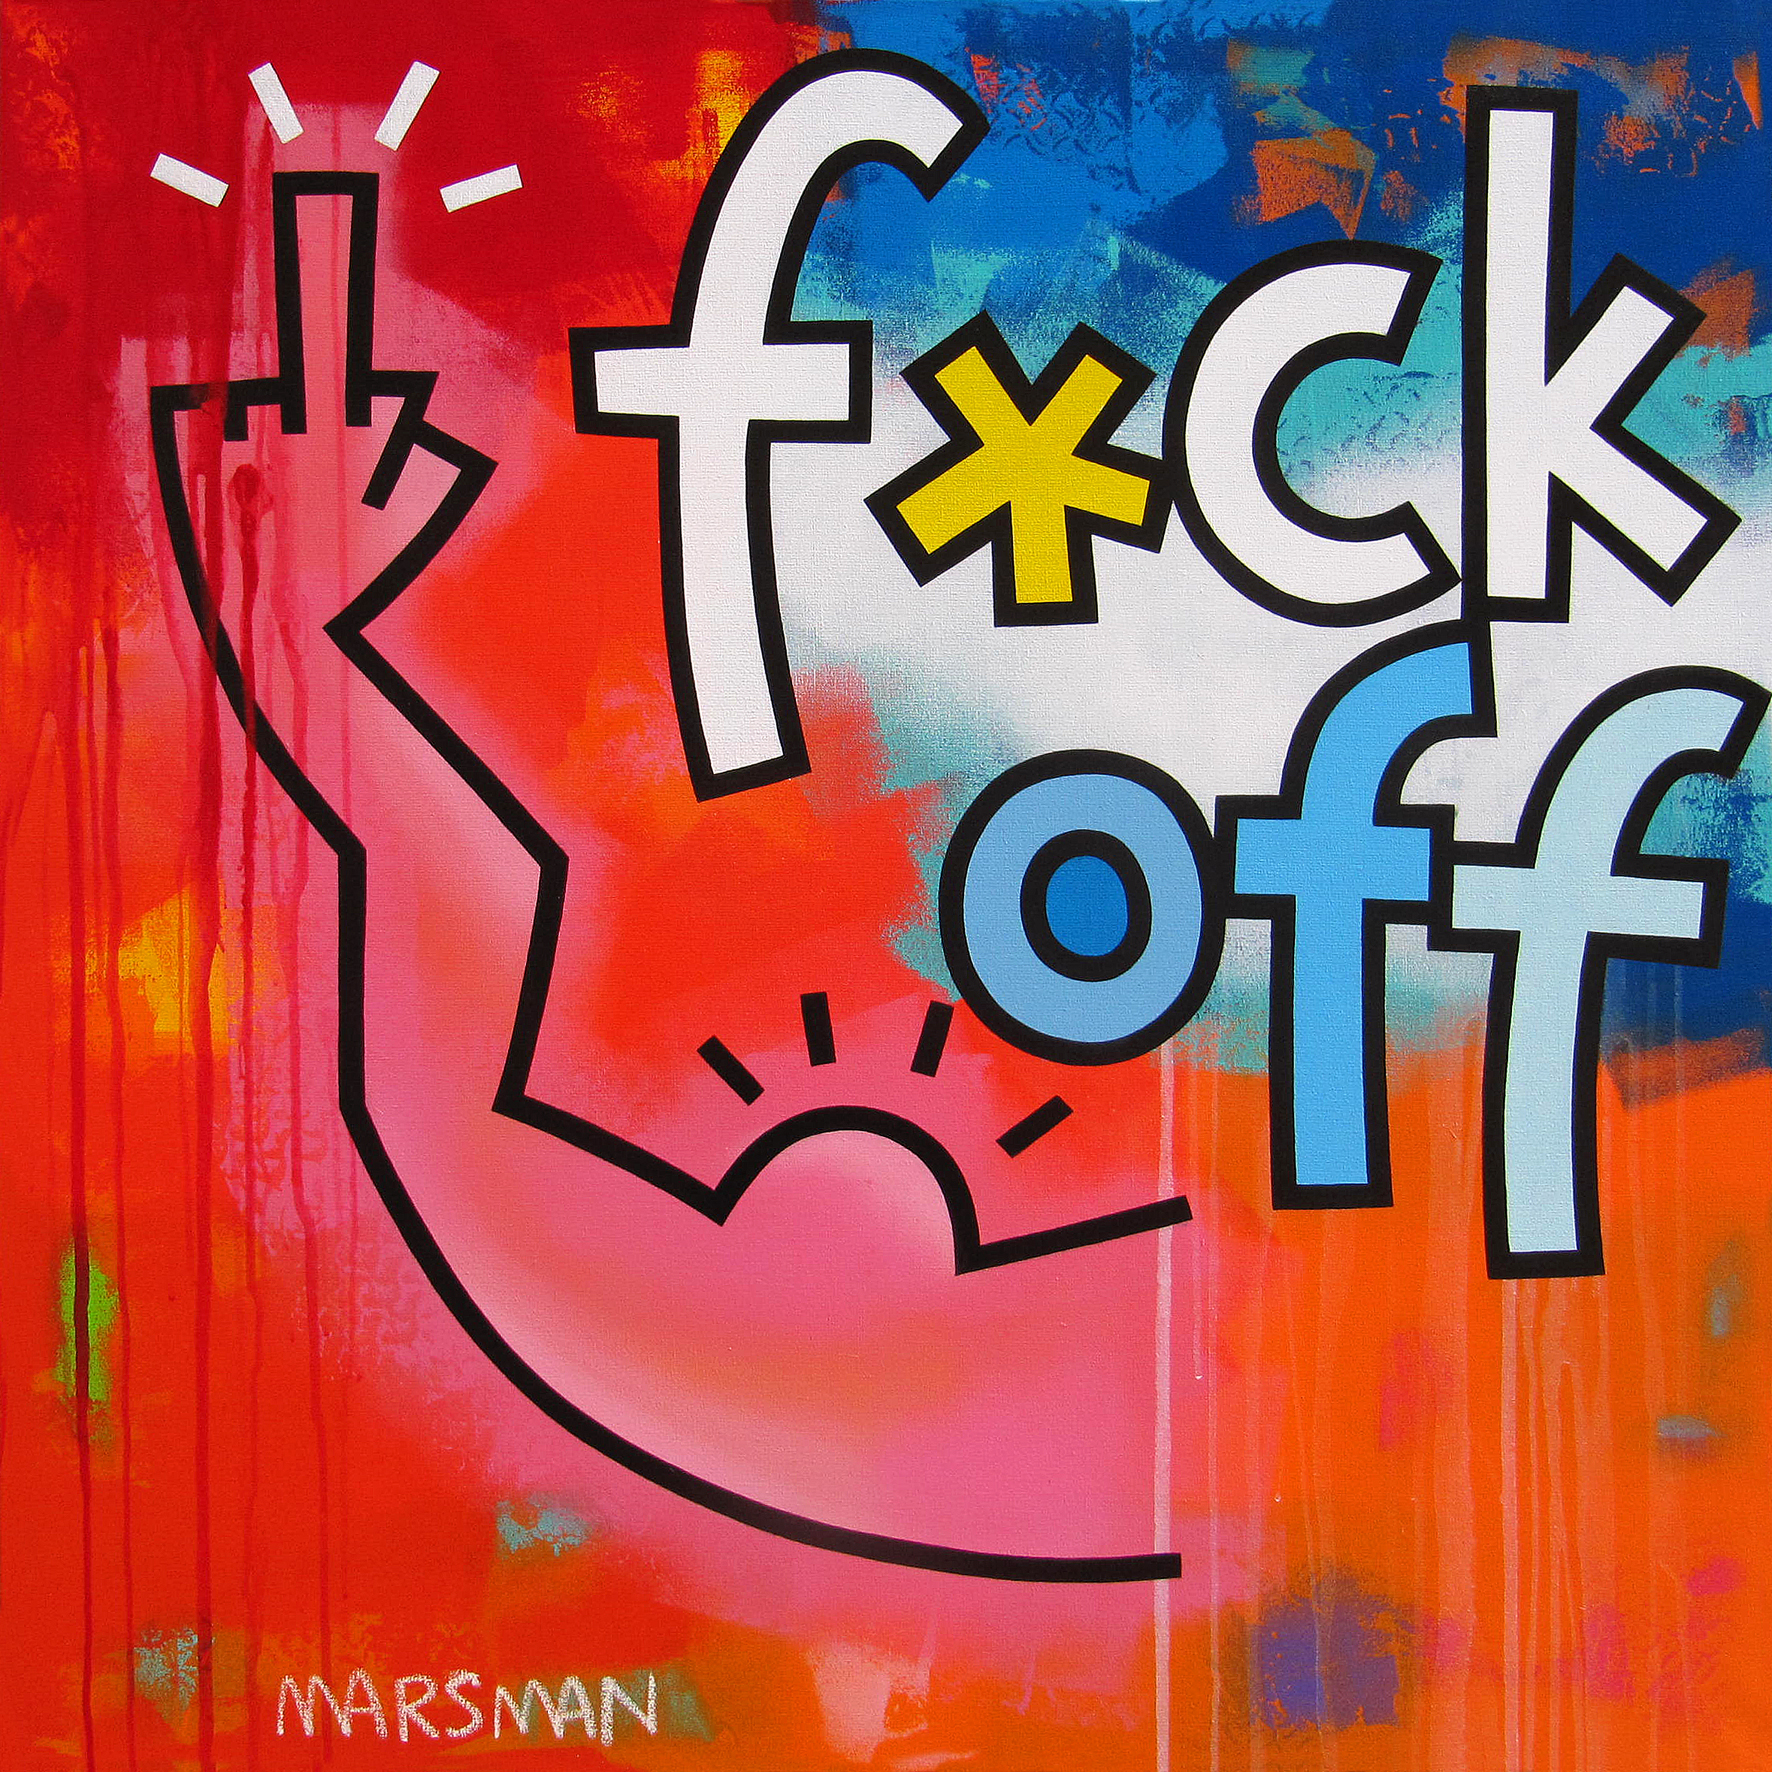 <b>FUCK OFF</b> - 100 x 100 cm - acrylic on canvas - SOLD  <a style="color: red; text-decoration: none" href="mailto:jpgpmarsman@onsbrabantnet.nl">BESTEL</a>